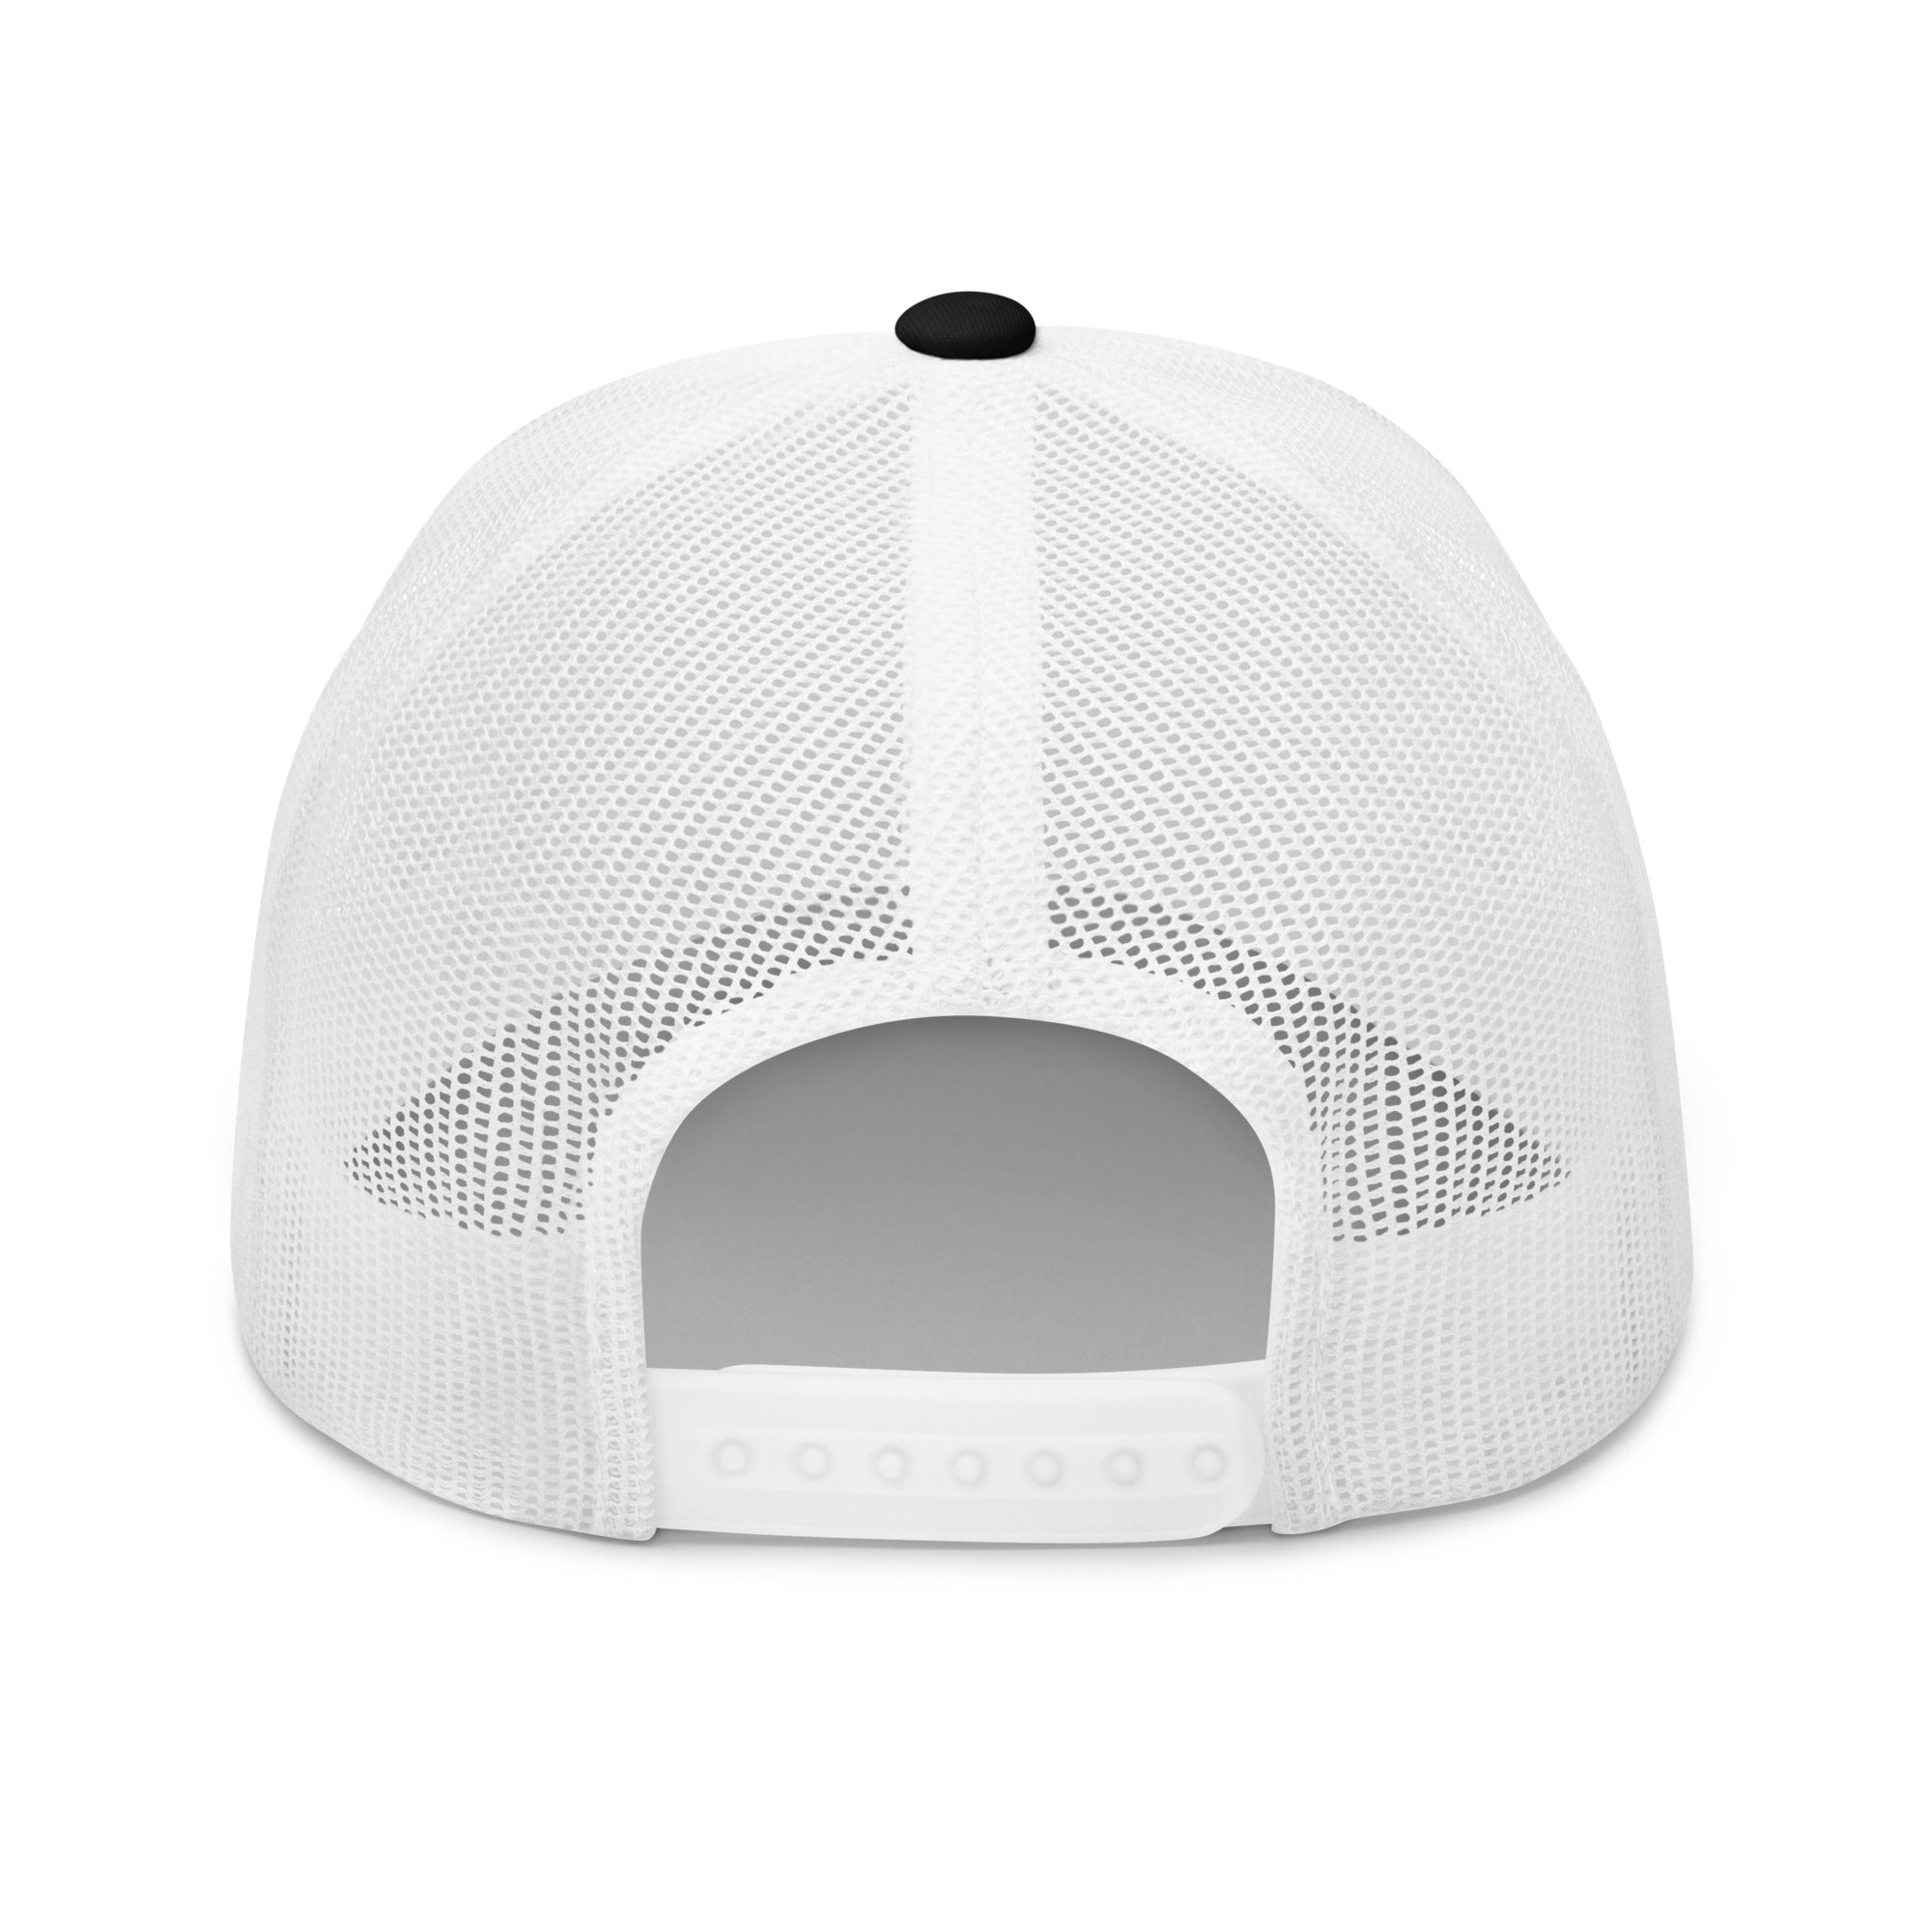 Bitcoin Accessories - The Stack Sats Trucker Hat has mesh back panels and a snapback closure. Back view.